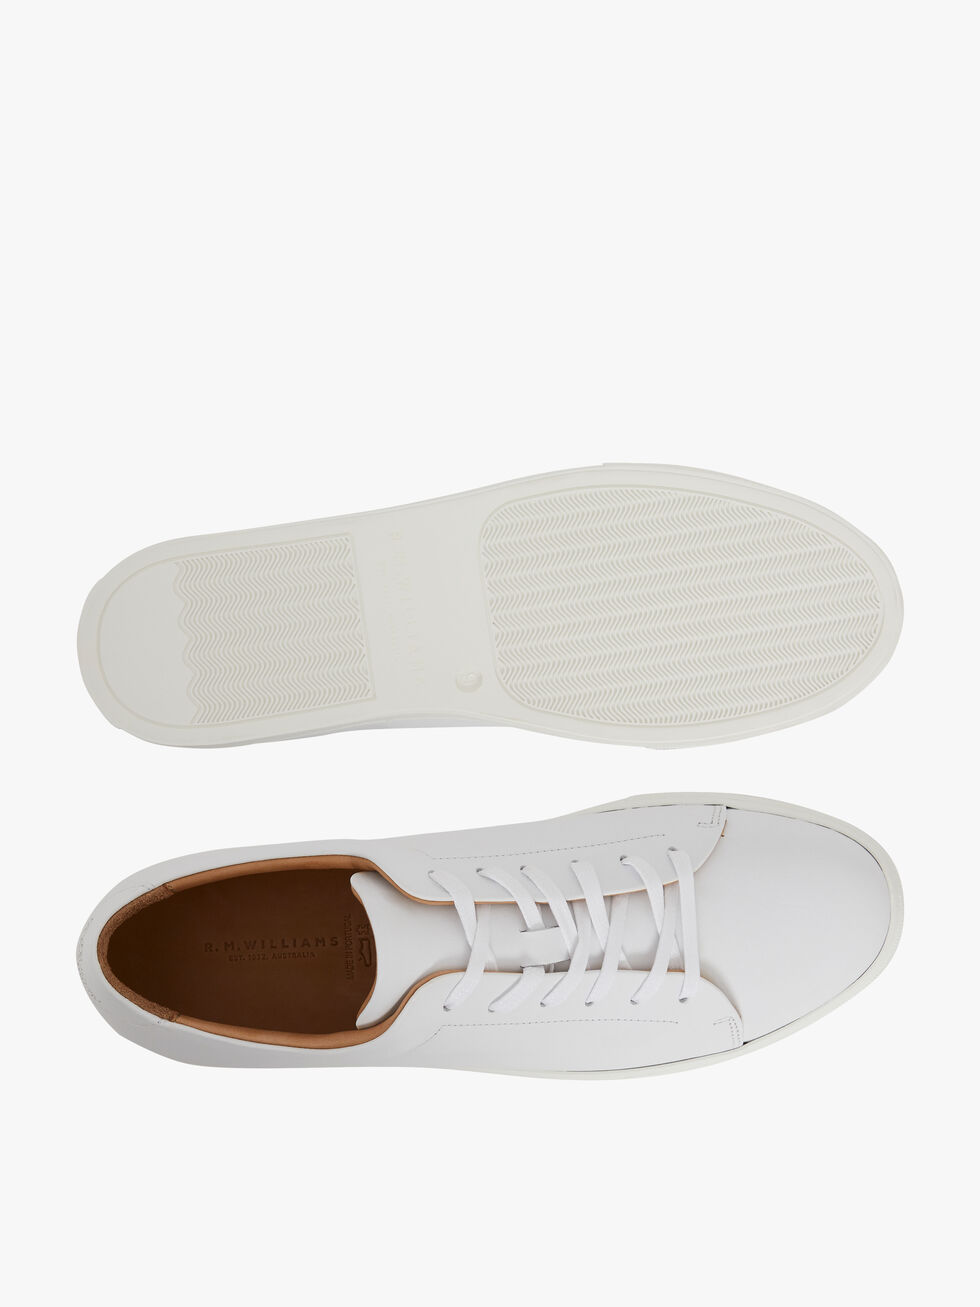 Surry Sneakers - Off White - Ruffords Country Store